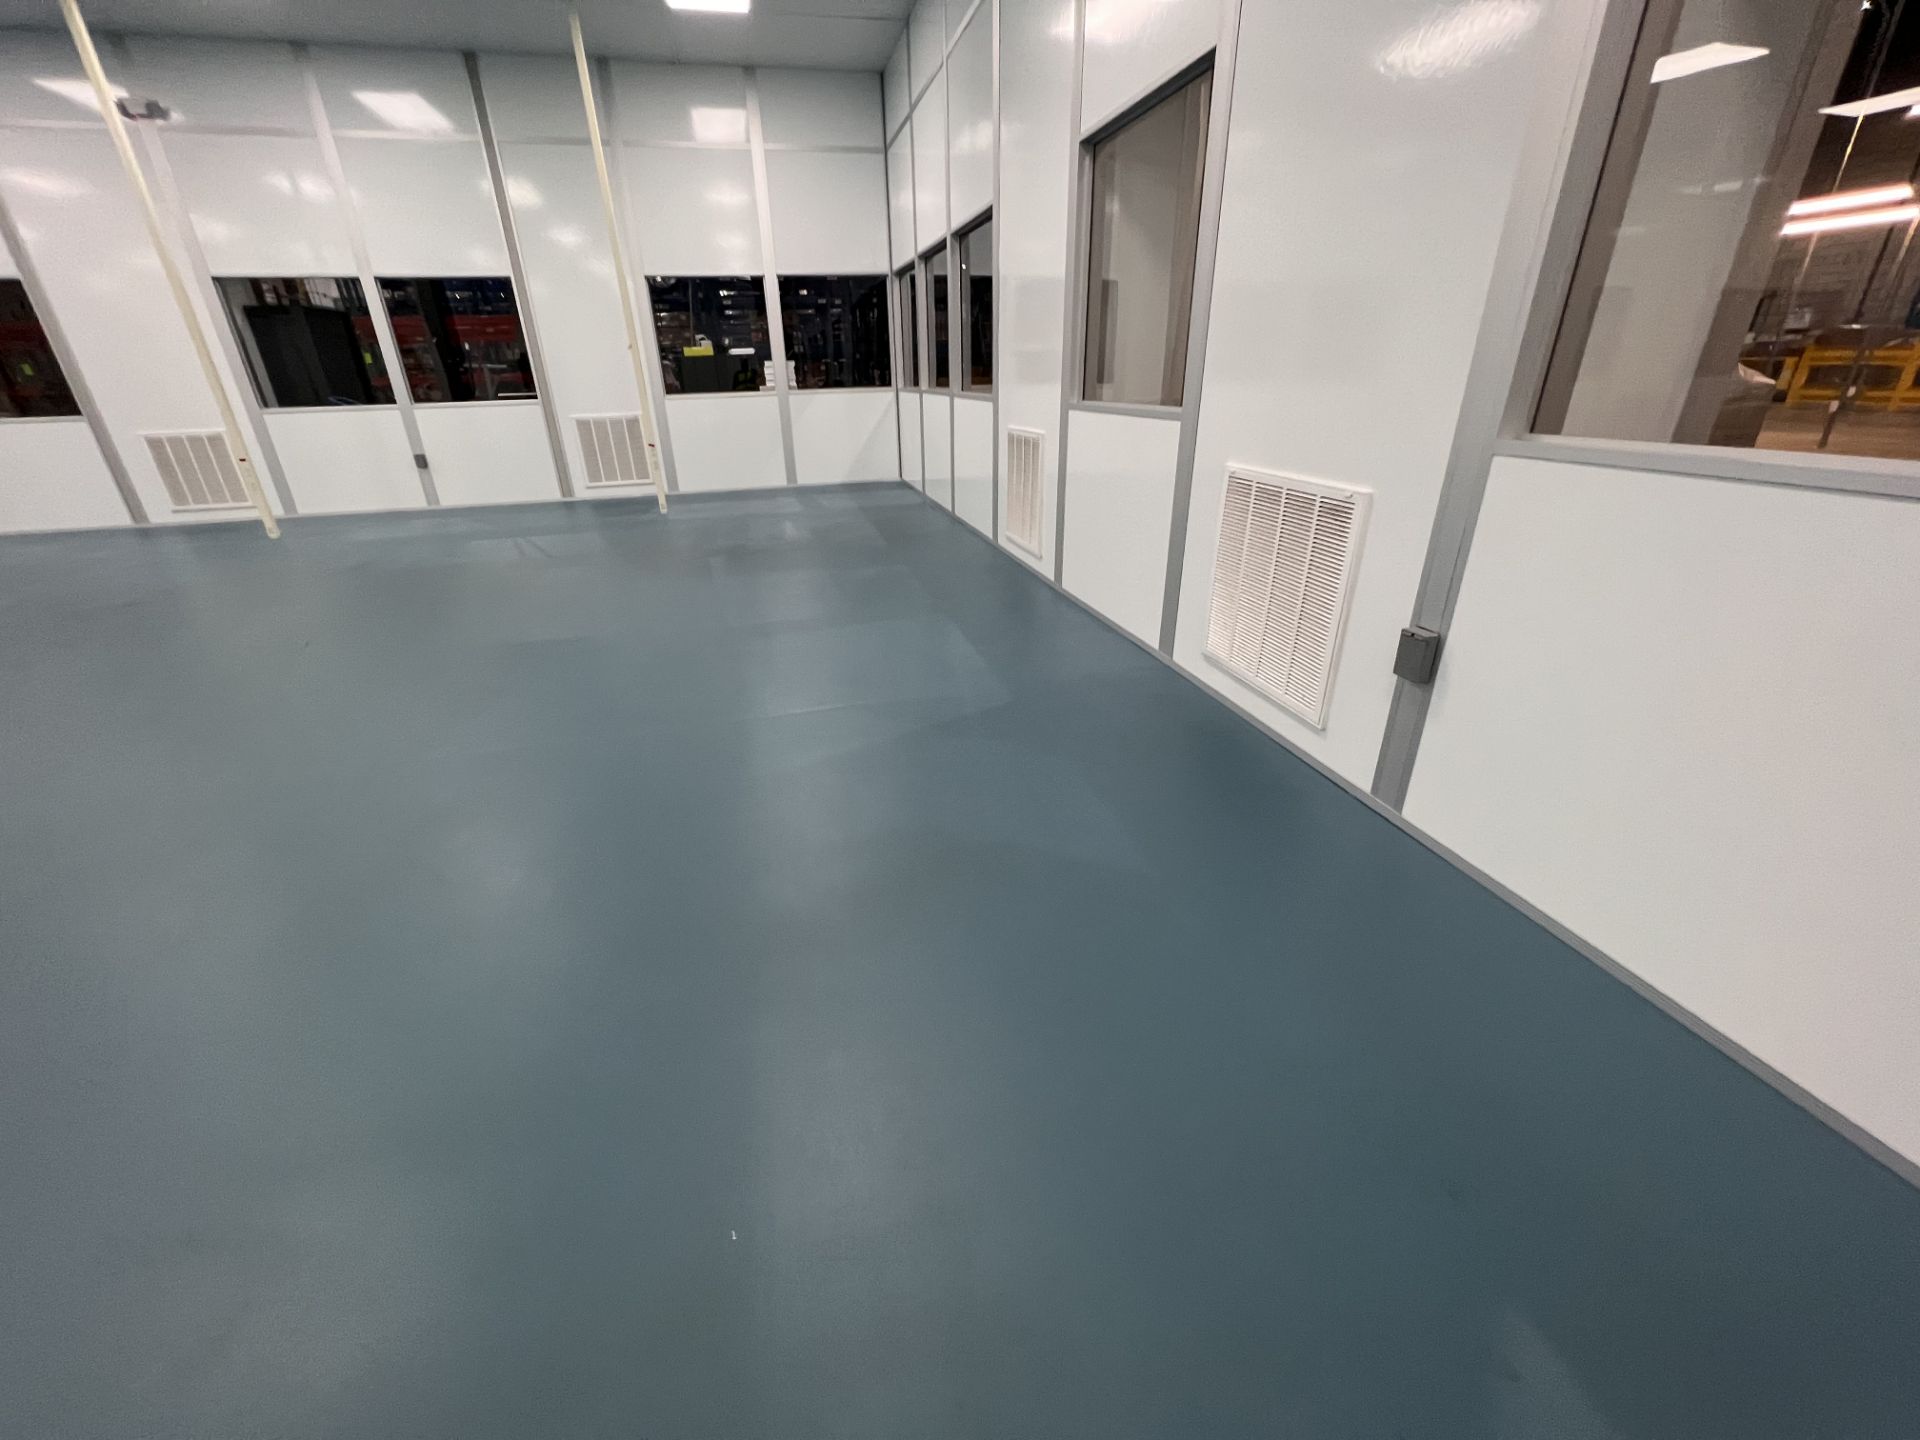 MODULAR CLEAN ROOM, APPROX. 60 FT X 60 FT X 11 FT 10 IN, INCLUDES HEPA FILTRATION UNITS - Image 26 of 34